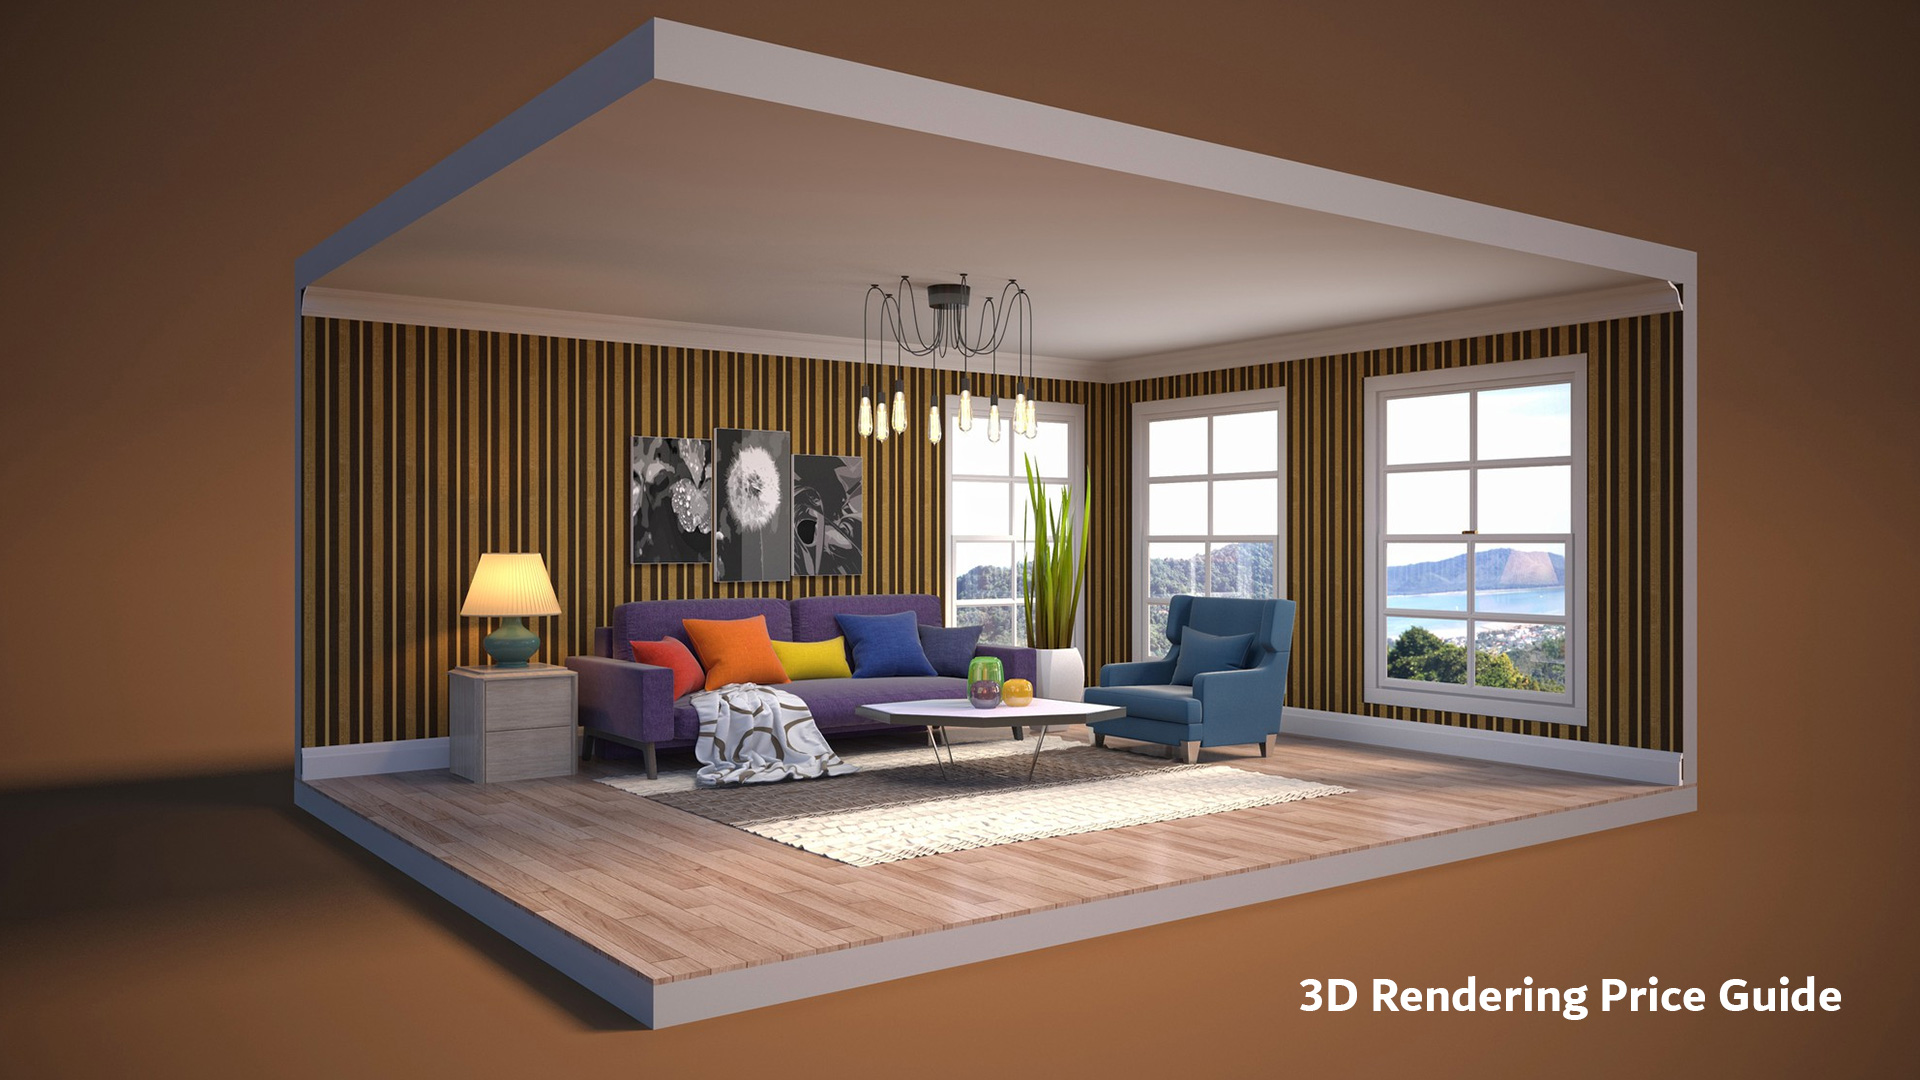 Architectural 3D Rendering Pricing Guide